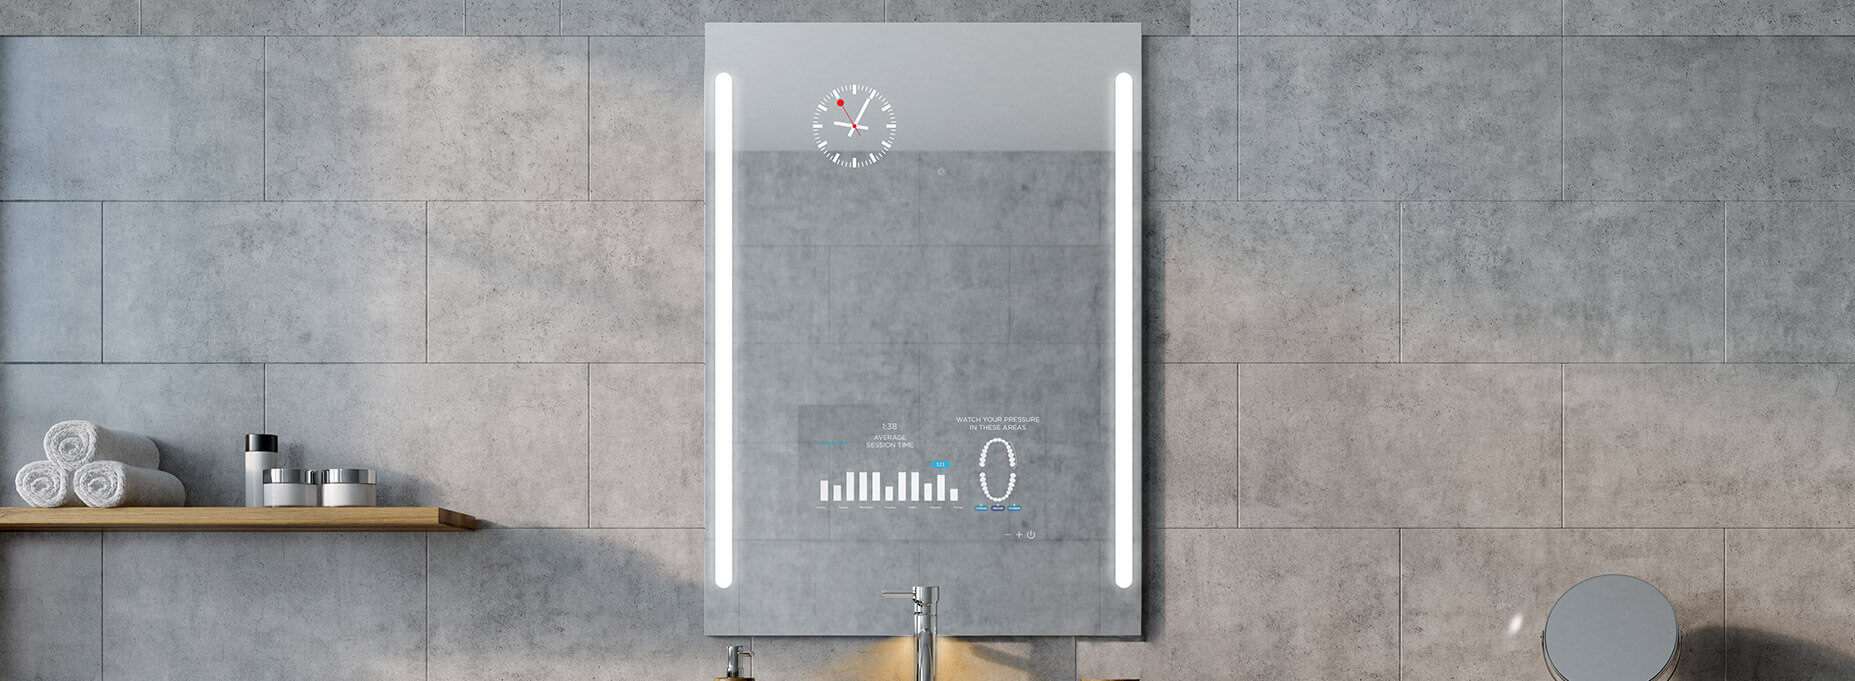 A smart bathroom mirror with its TV turned off mounted to the tiled wall of a bathroom